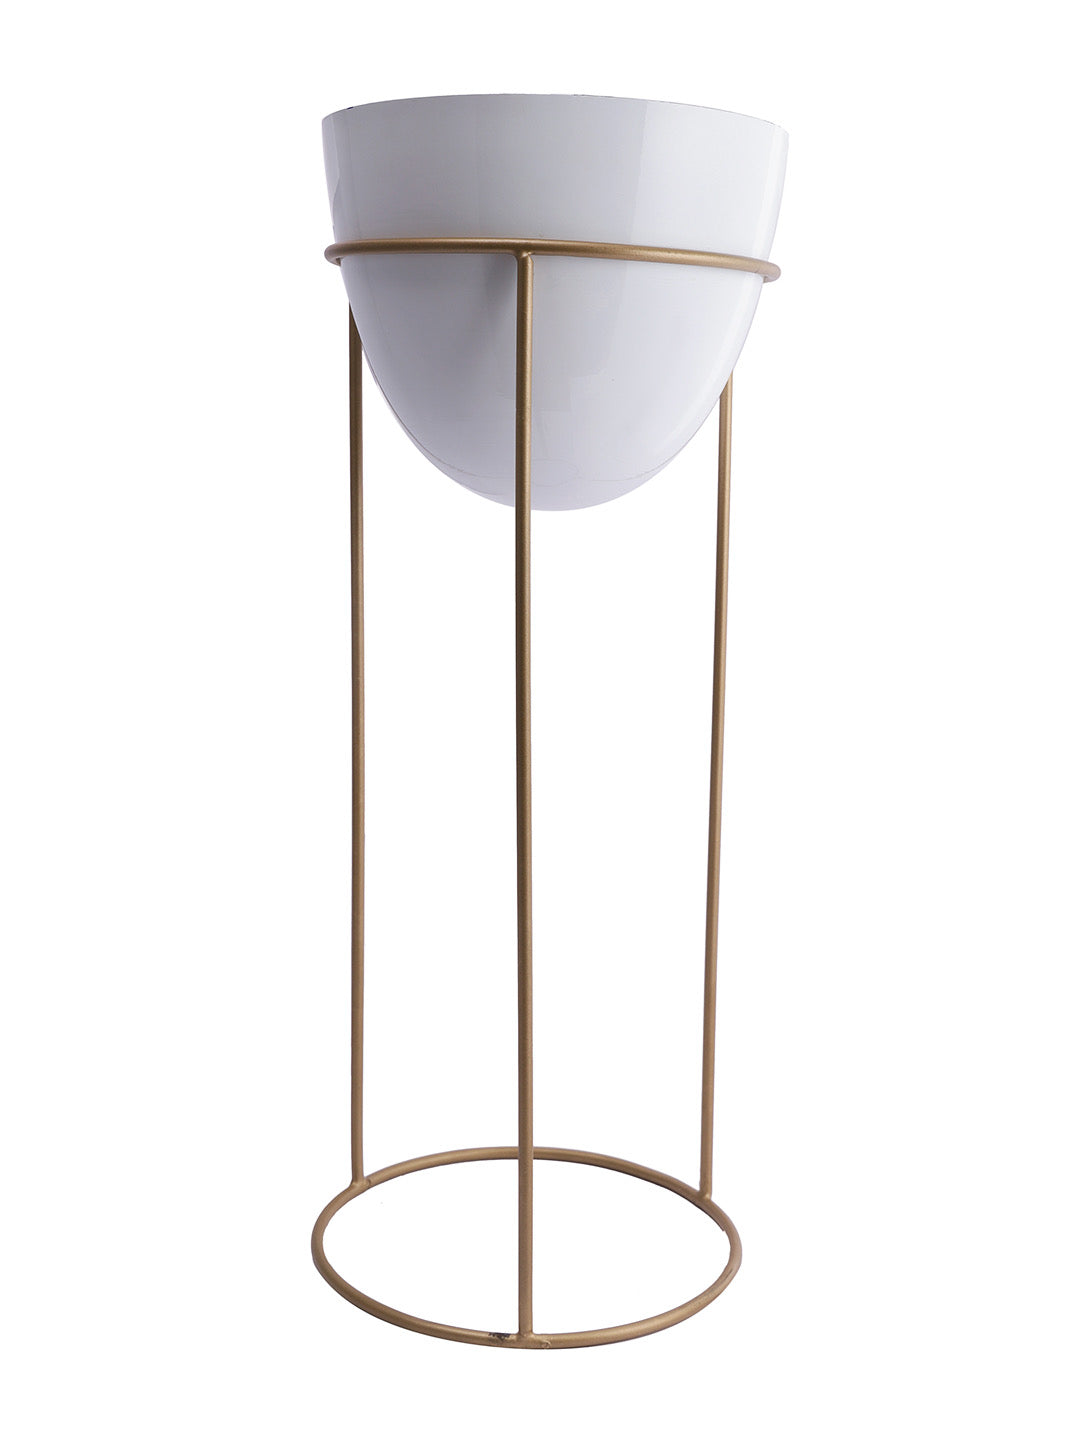 White Planter Pot with Golden stand - Default Title (CHM2123SM)